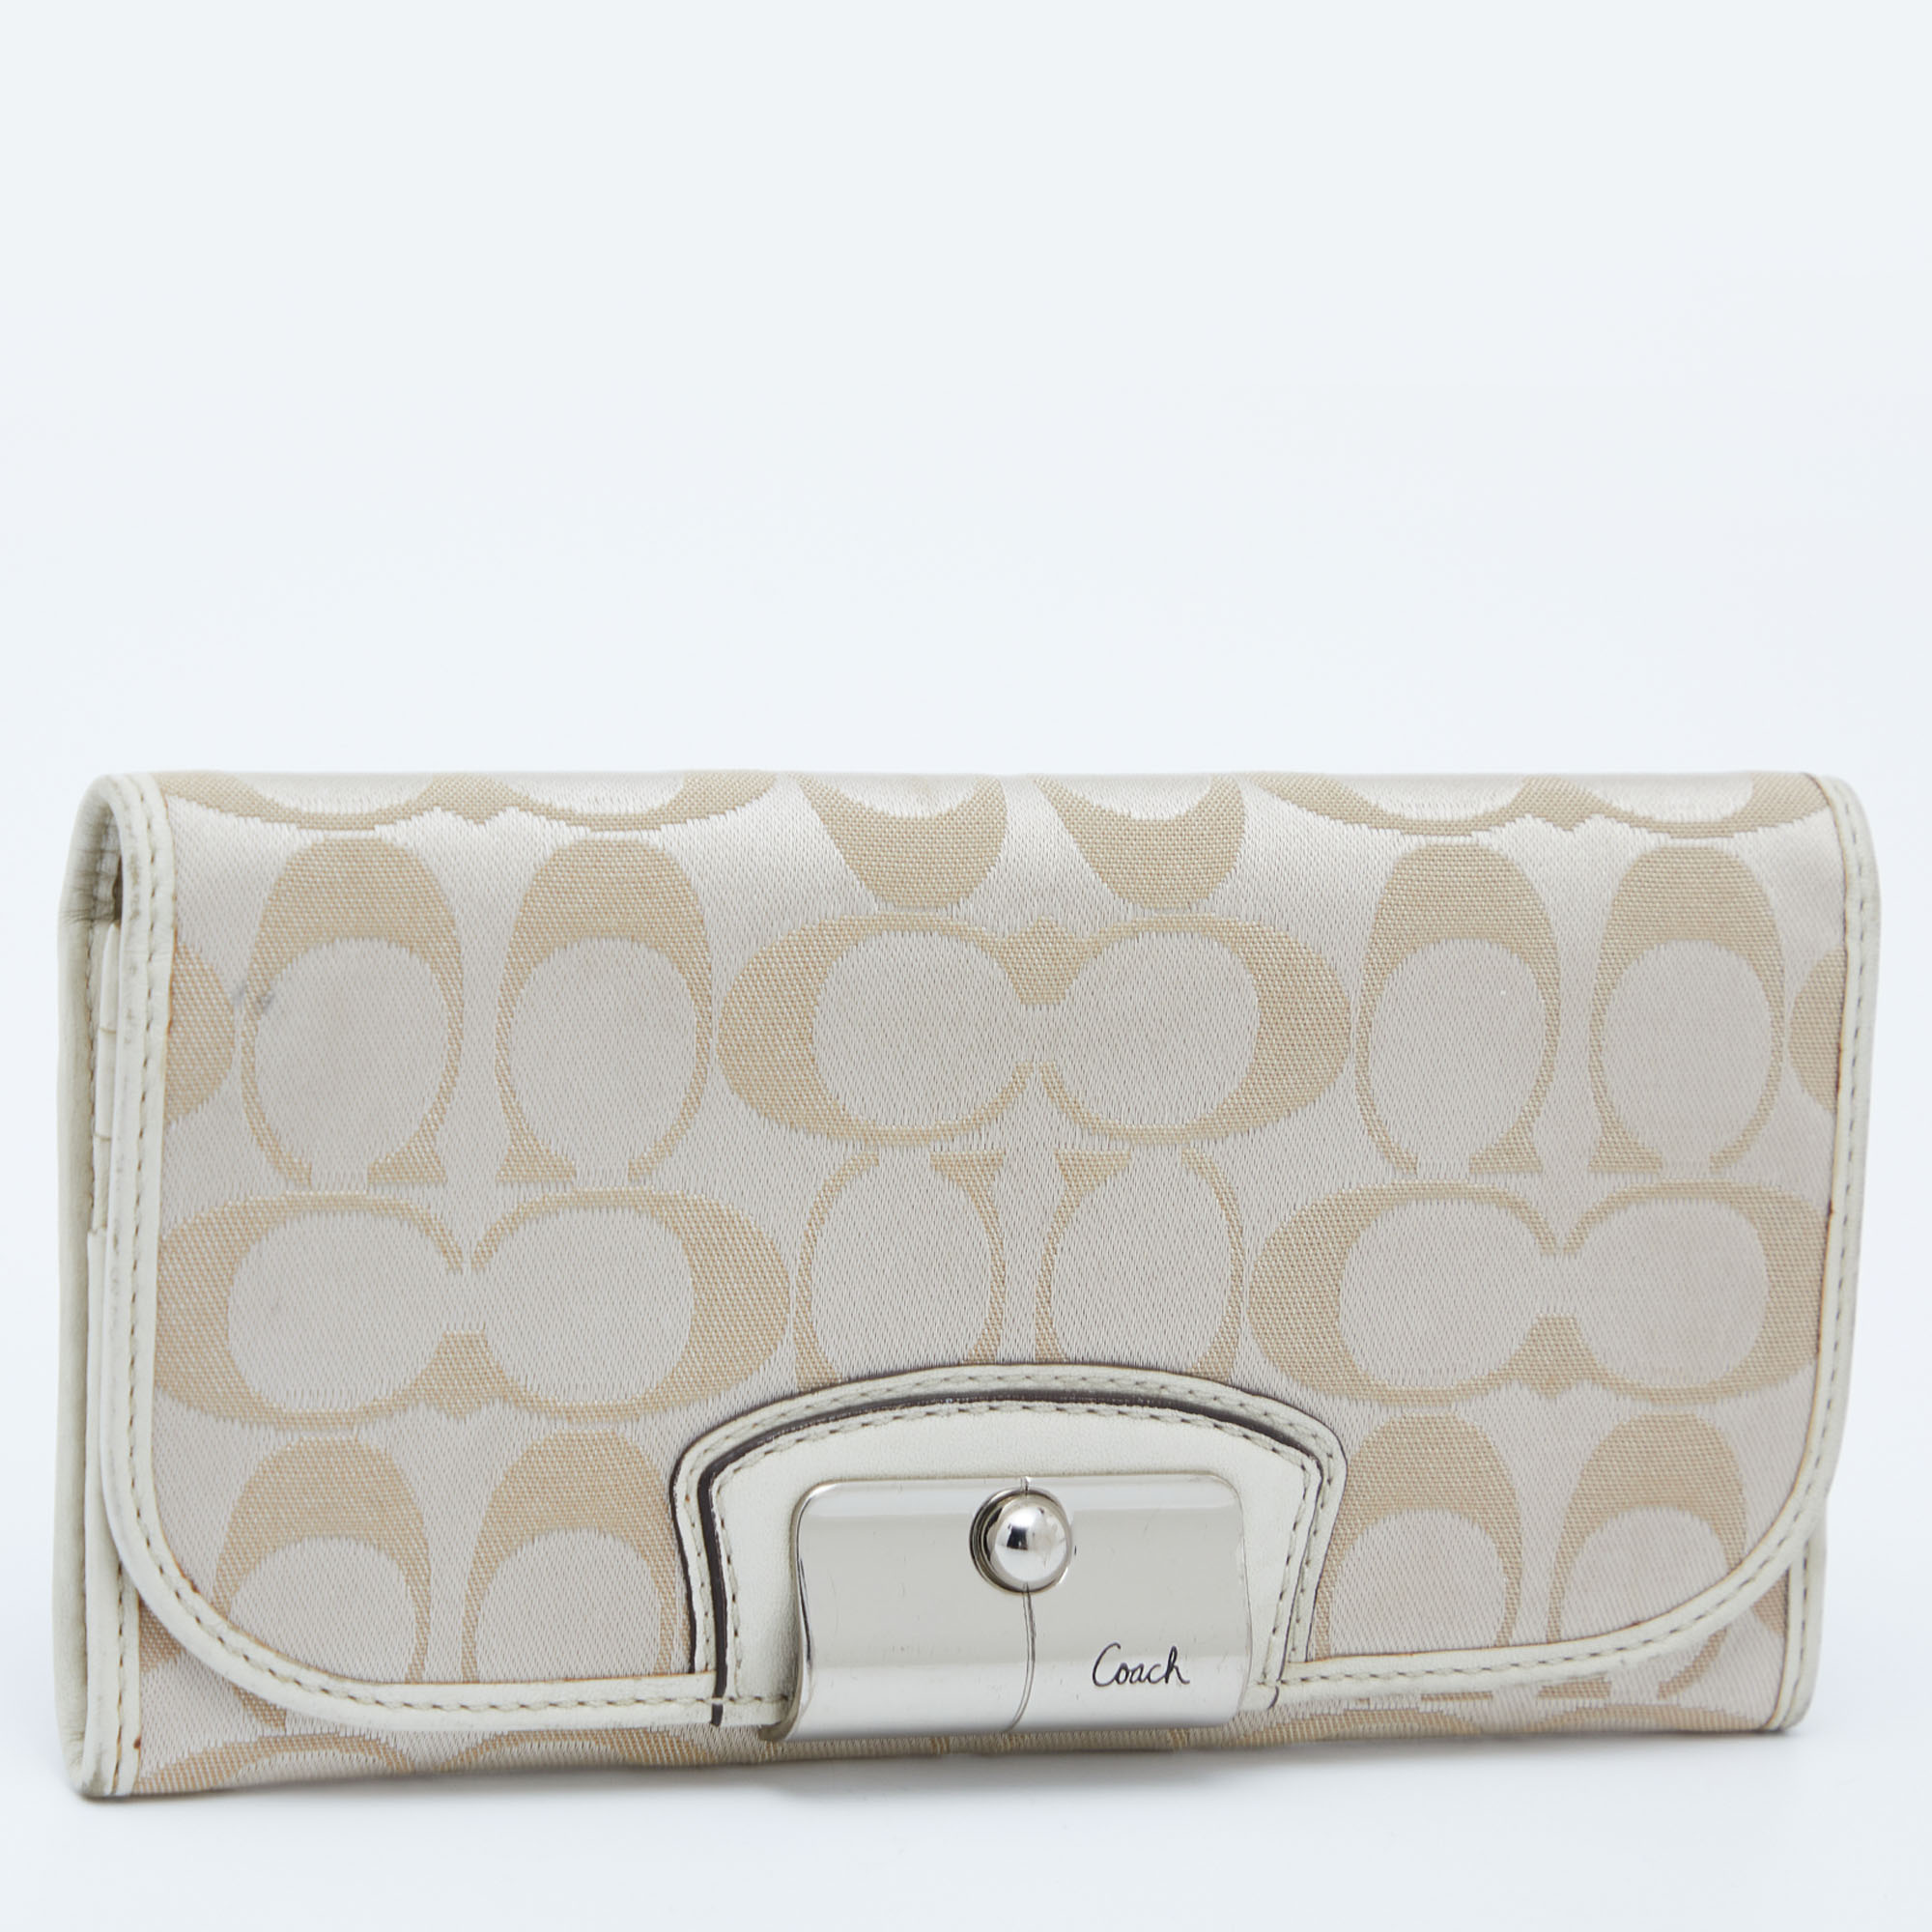 Coach Beige/White Signature Canvas And Leather Flap Continental Wallet